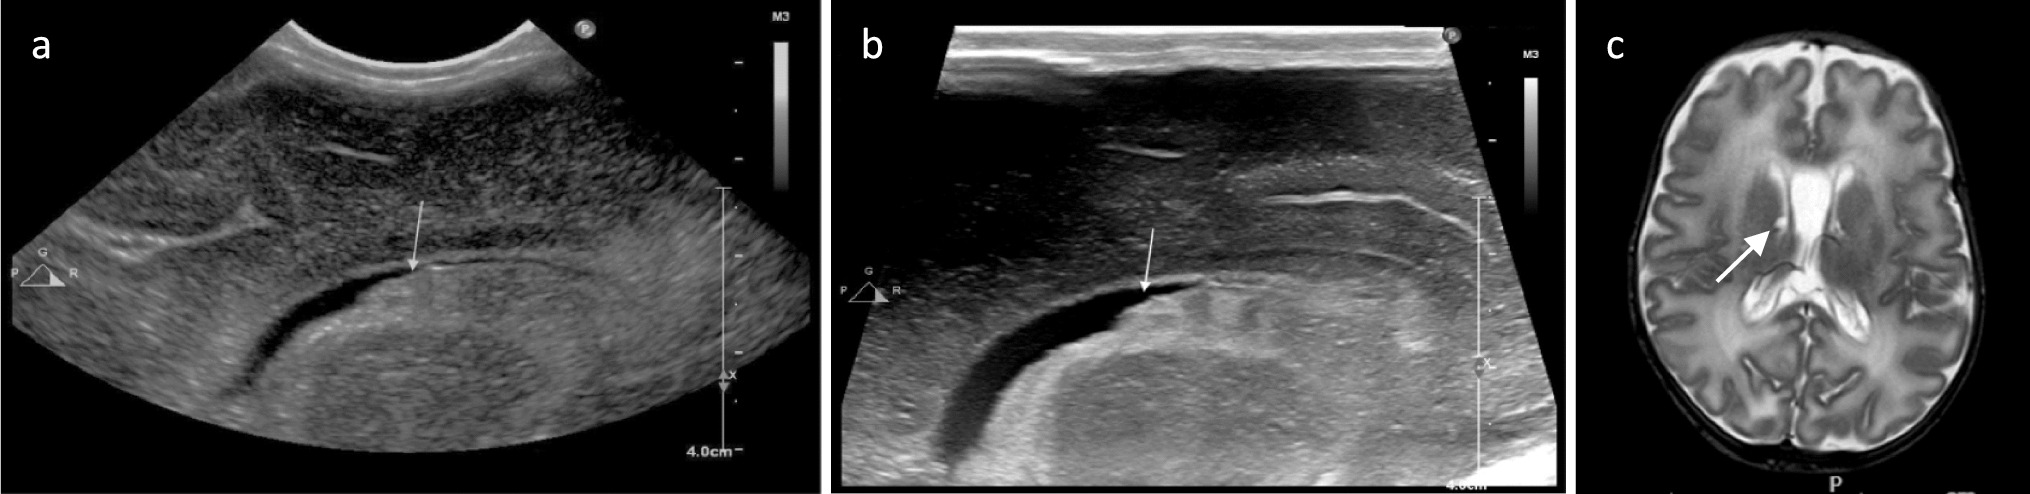 Cranial ultrasound in preterm infants ≤ 32 weeks gestation—novel insights from the use of very high-frequency (18-5 MHz) transducers: a case series